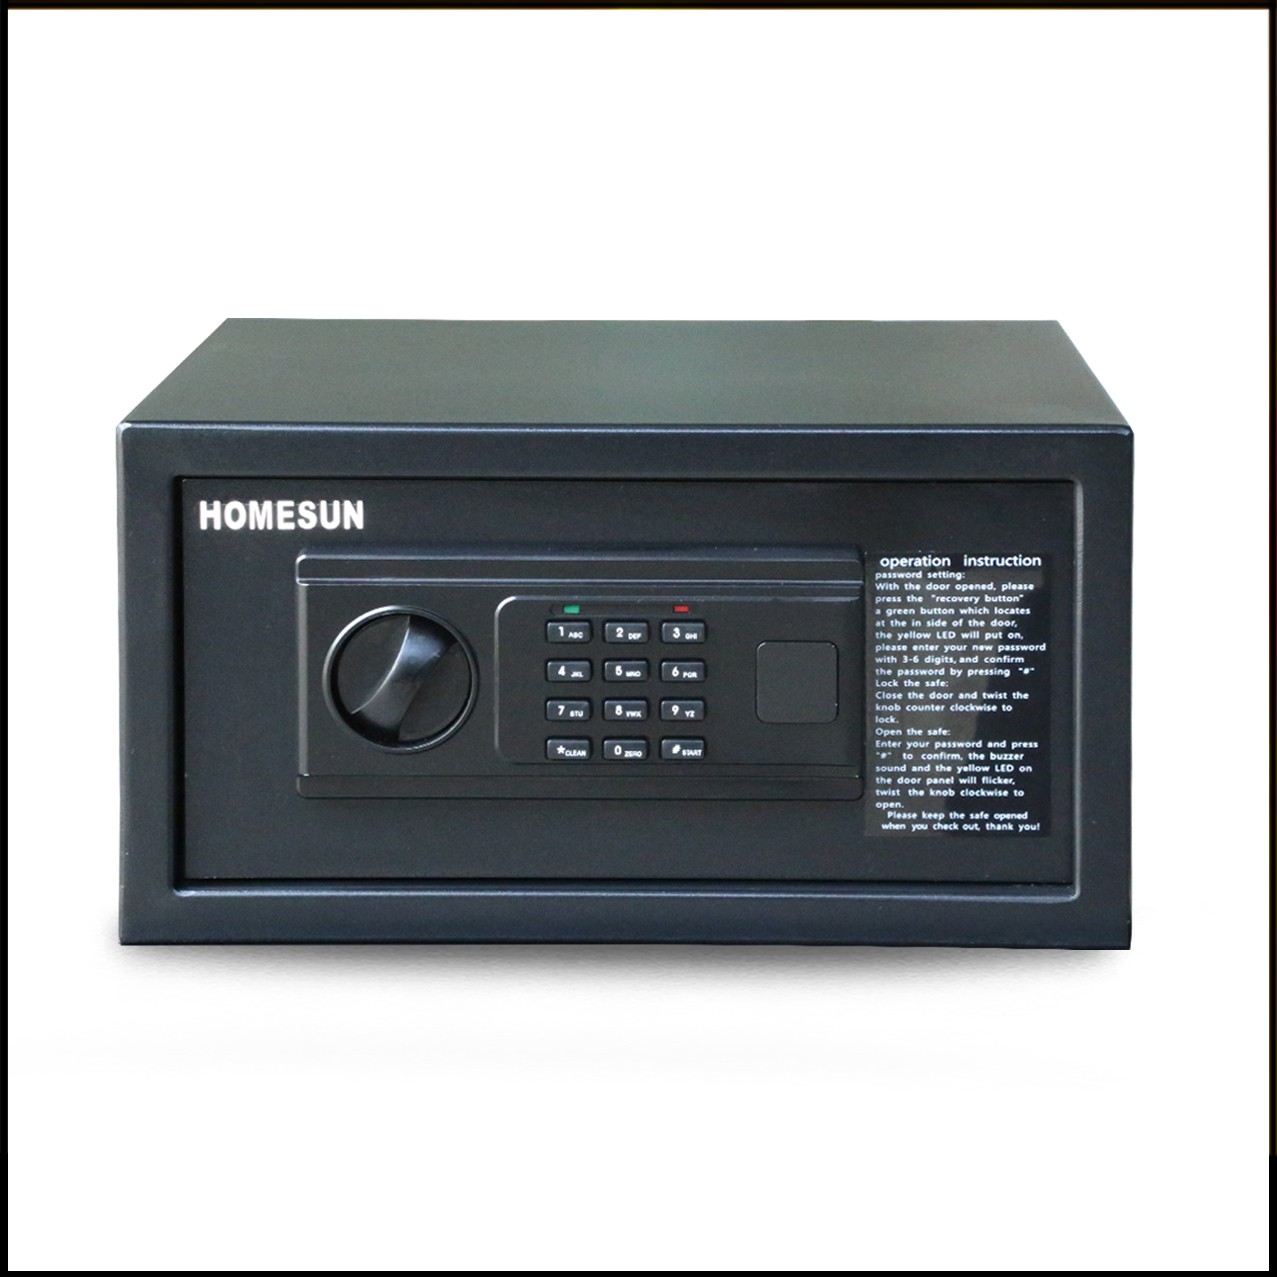 Hotel Room Security Wholesale Suppliers